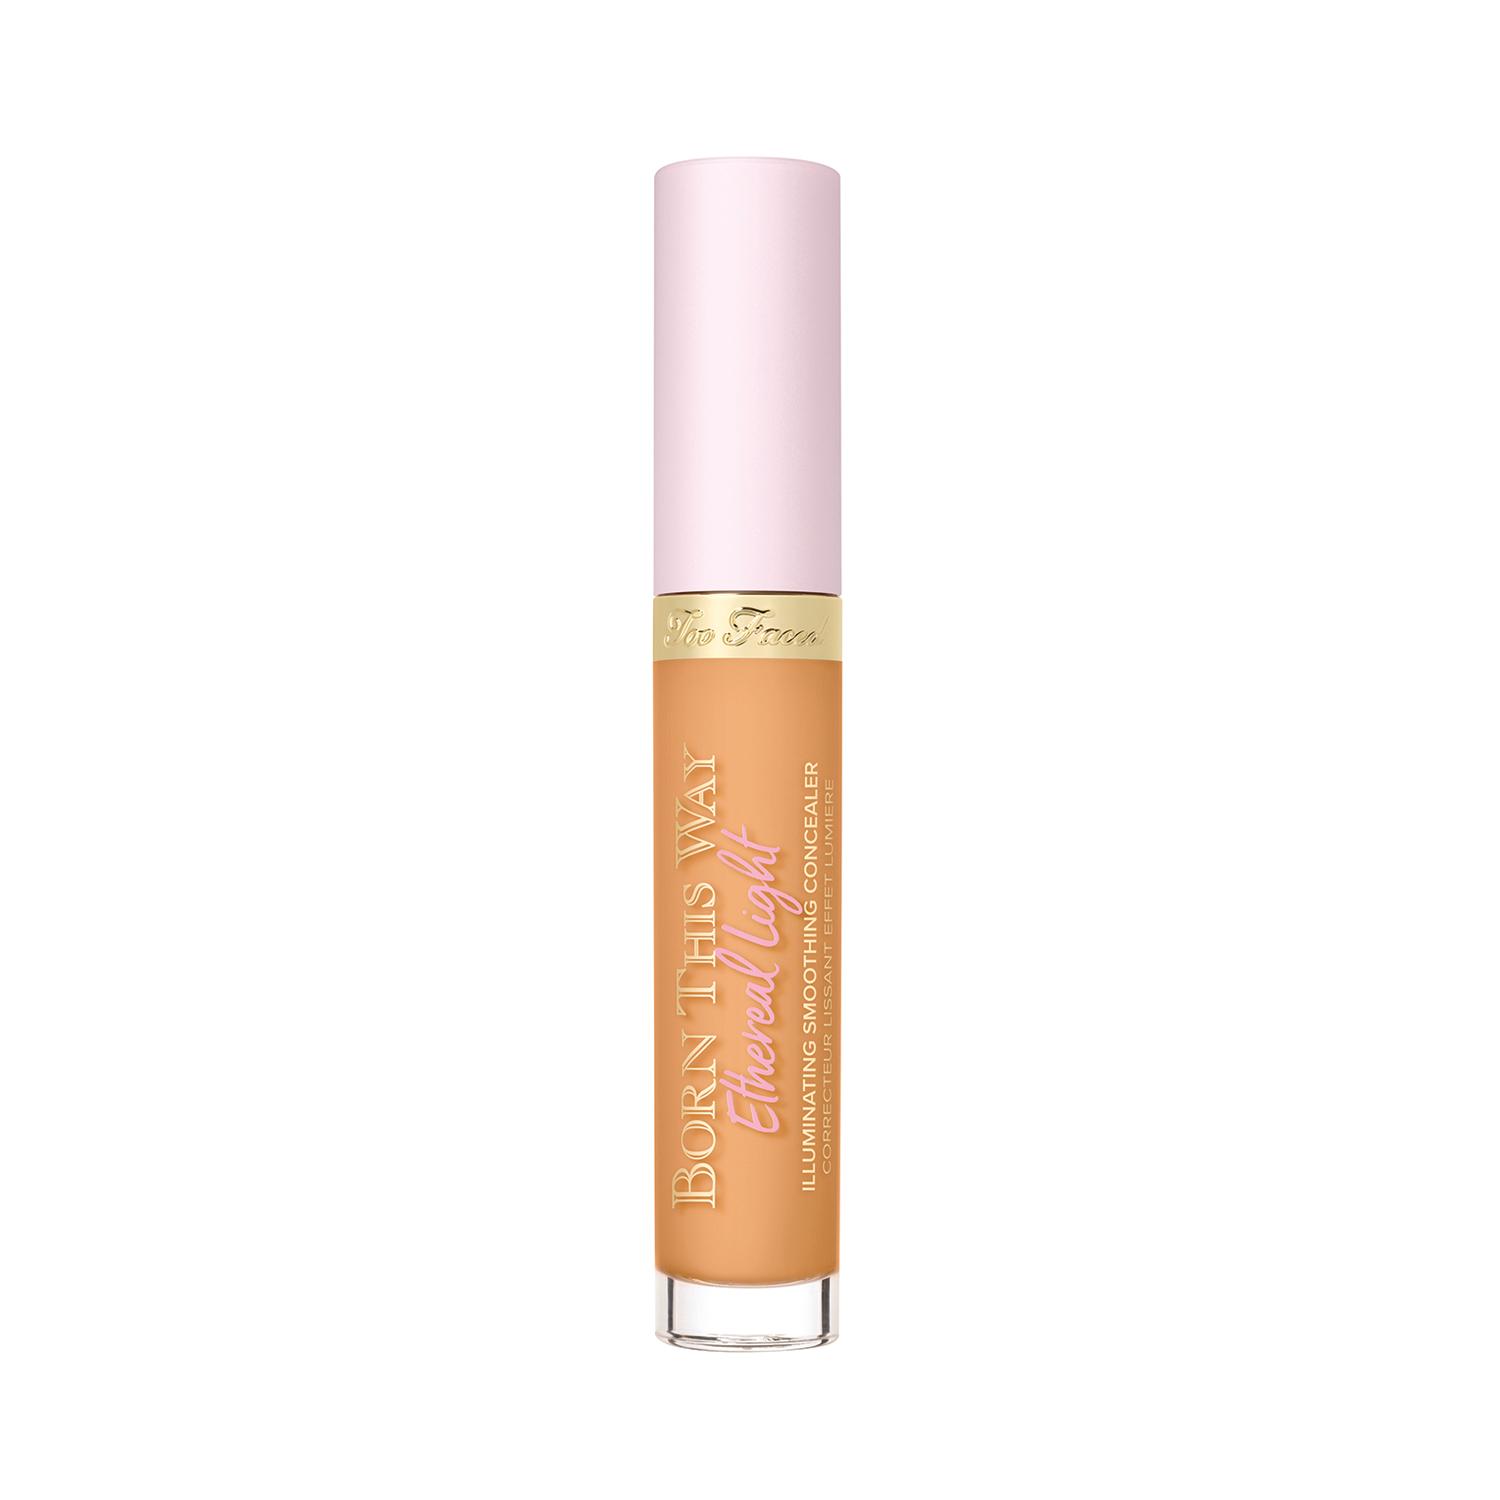 Too Faced | Too Faced Born This Way Illuminating Concealer - Gingersnap (5ml)